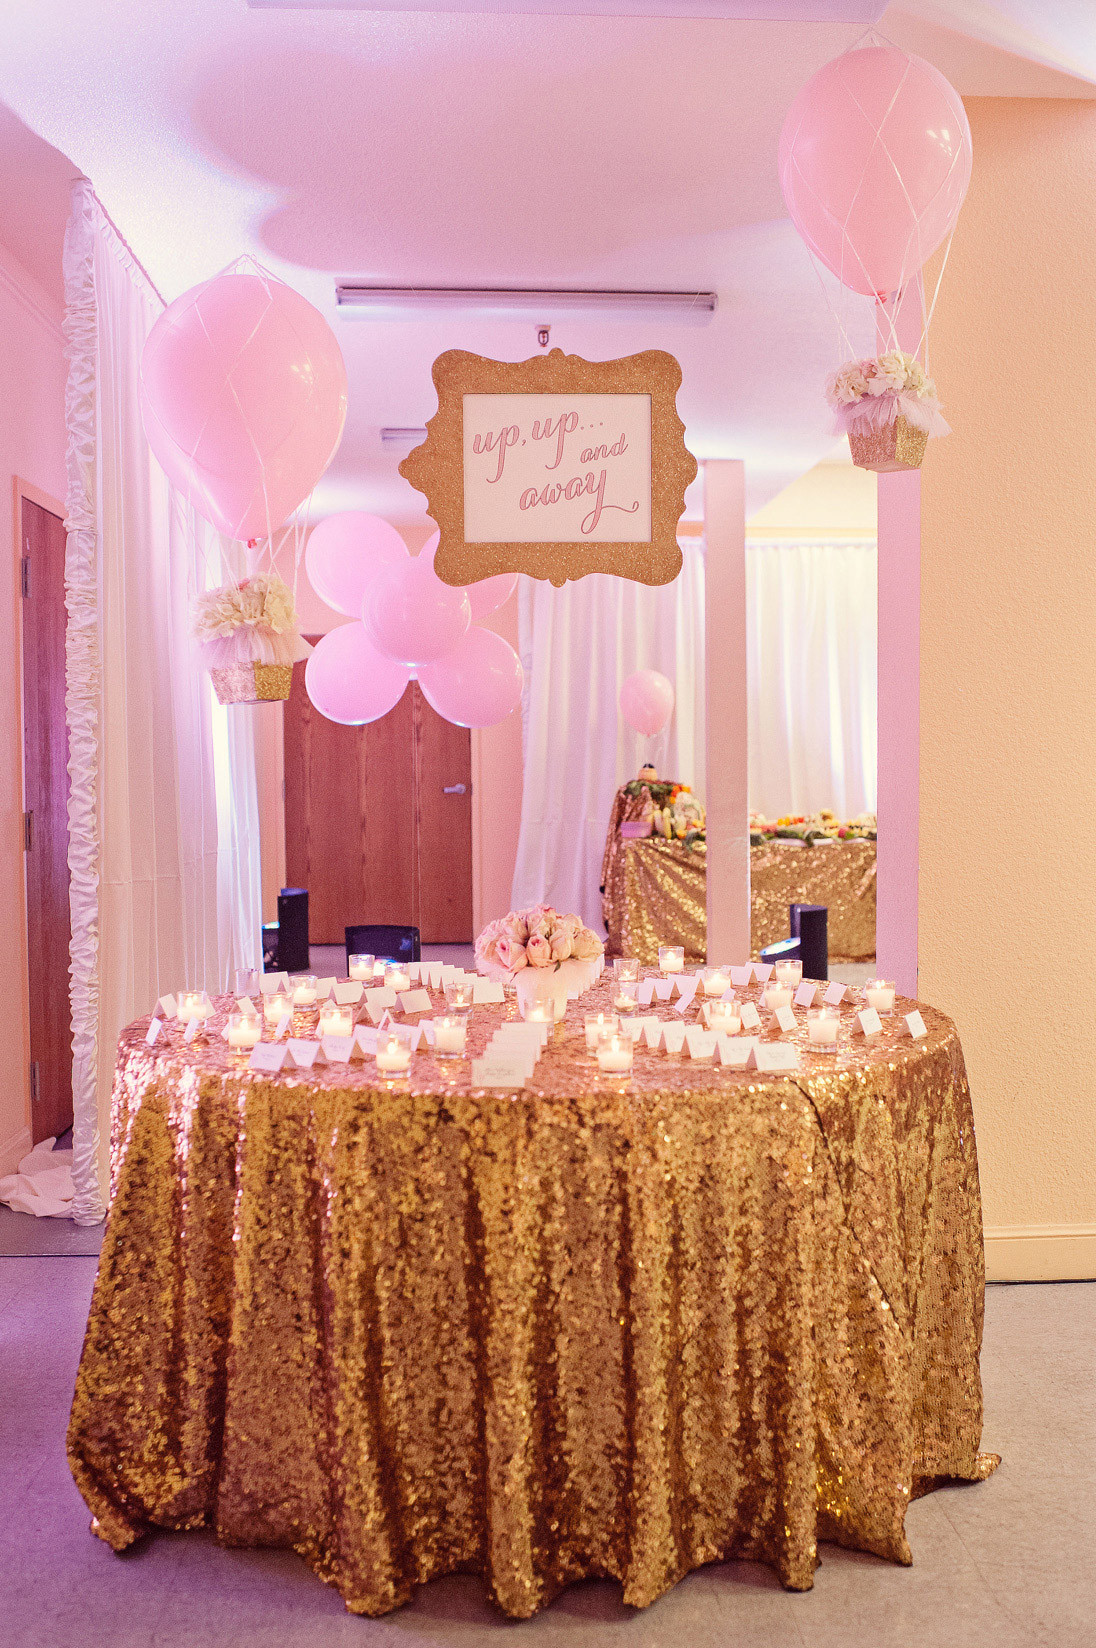 Pink And Gold Birthday Decorations
 A Glittering Pink and Gold Hot Air Balloon Themed Birthday